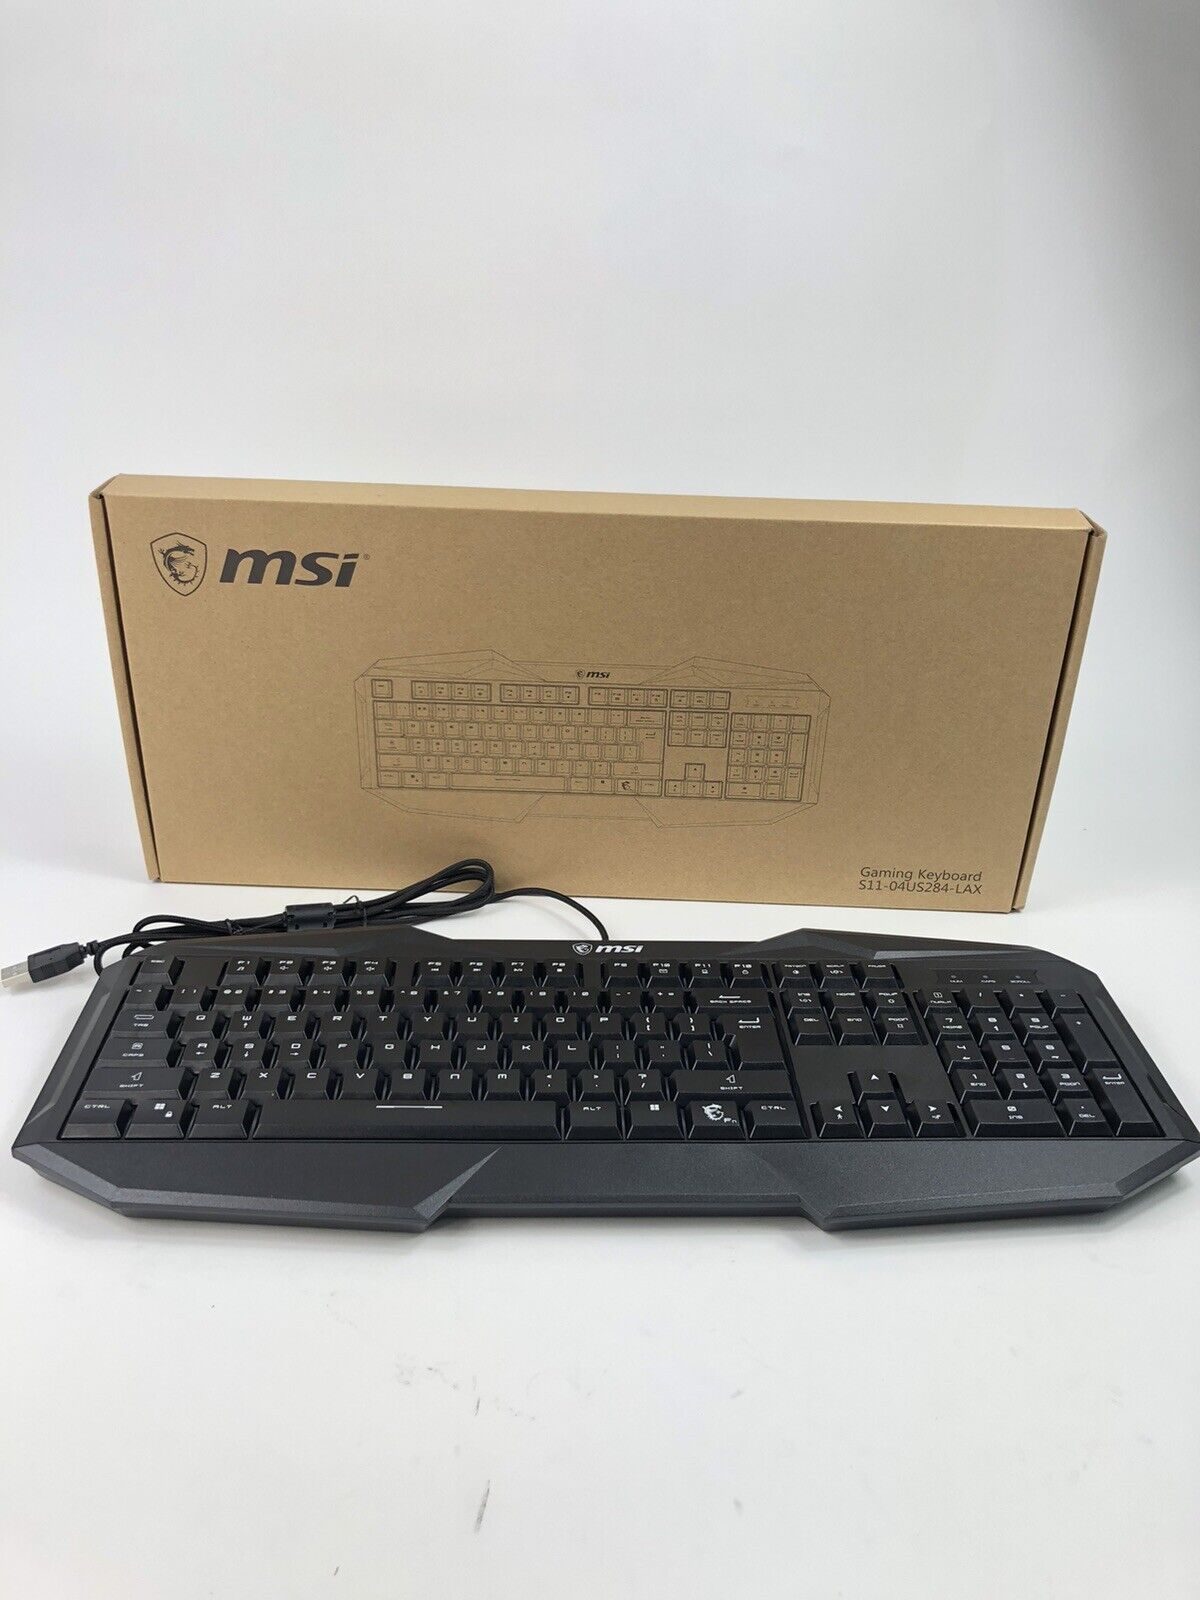 MSI Wired Gaming Keyboard S11-04US284-LAX